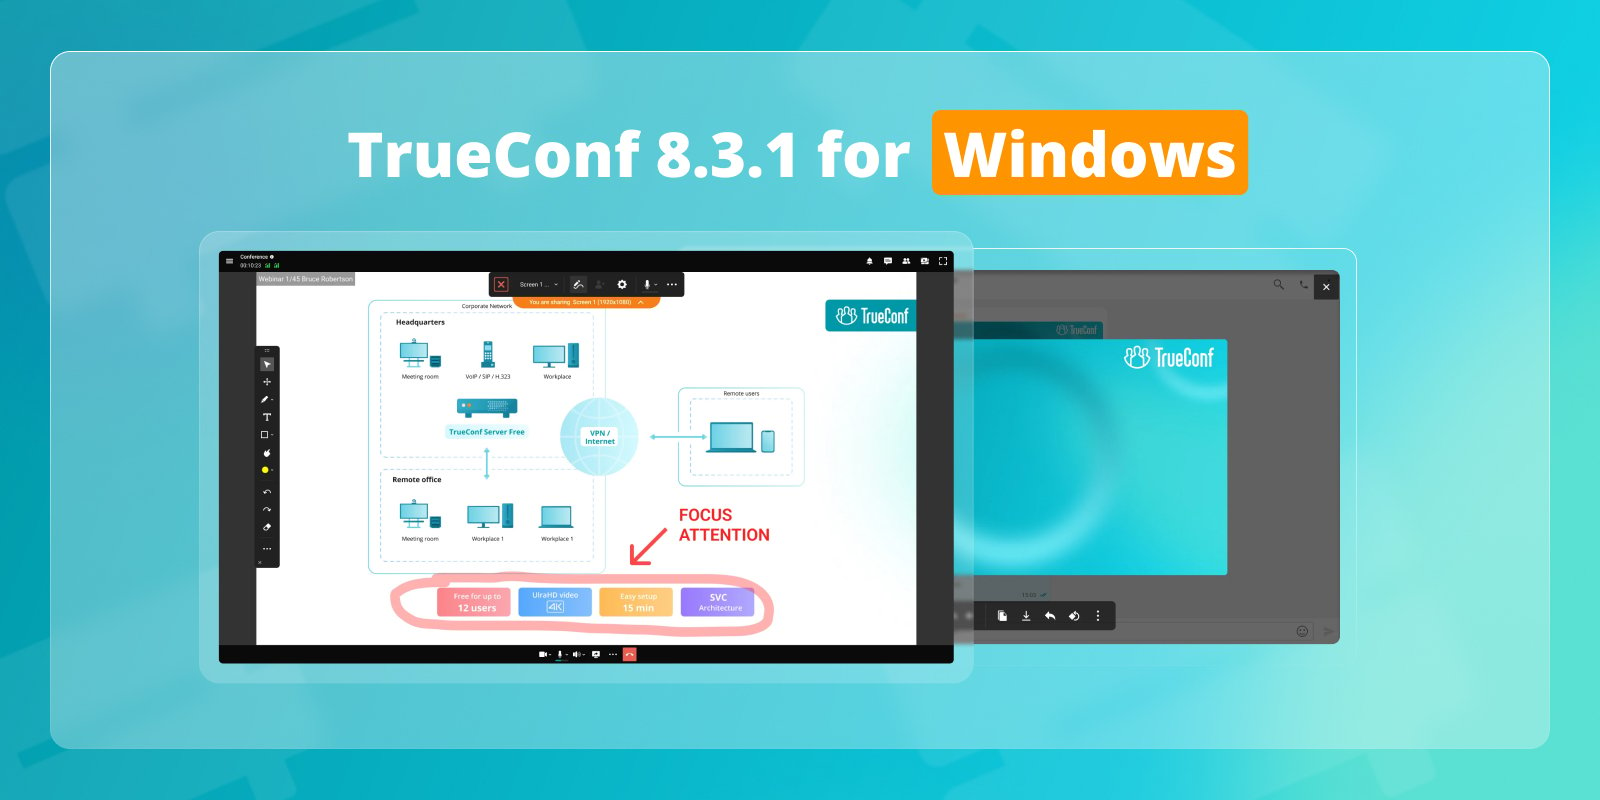 TrueConf 8.3.1 for Windows Update: Minor fixes and Improvements 1